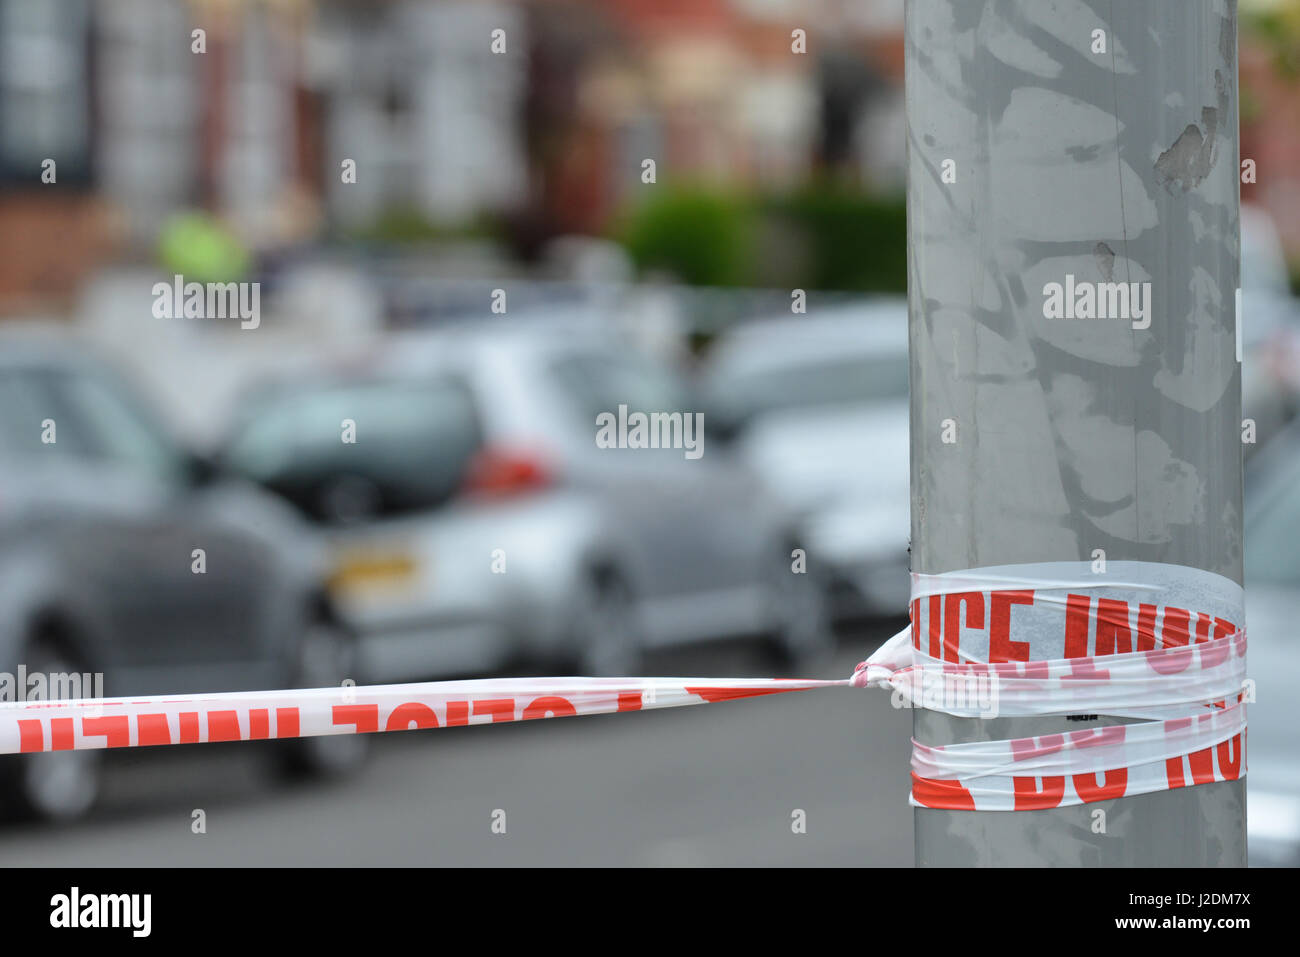 Willesden, London, UK. 28th April 2017. Police officers at the scene of the terror raid in Willesden. Credit: Matthew Chattle/Alamy Live News Stock Photo